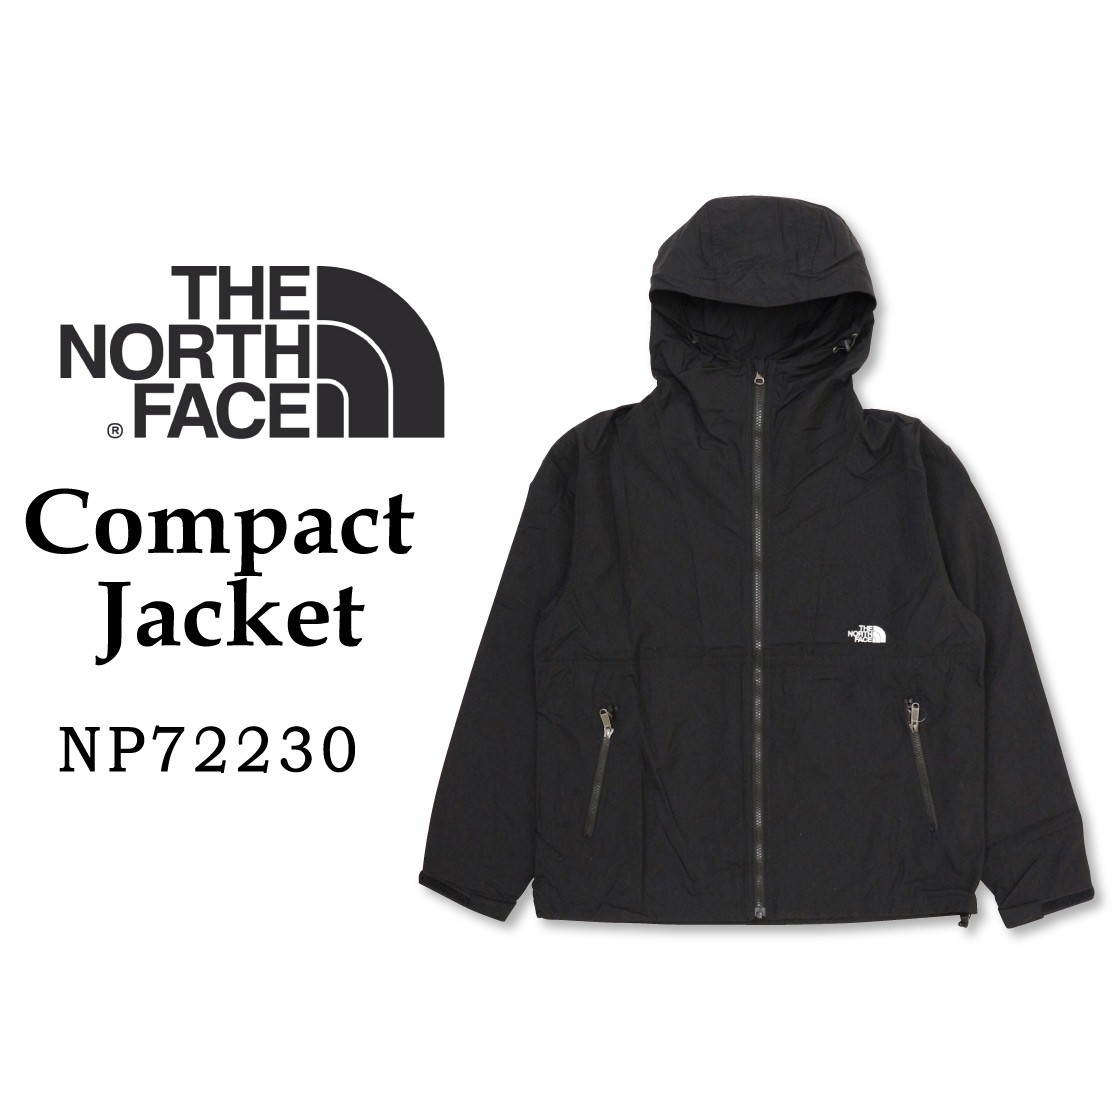 THE NORTH FACE ザ Compact Jacket コンパクトジャケット NP72230...